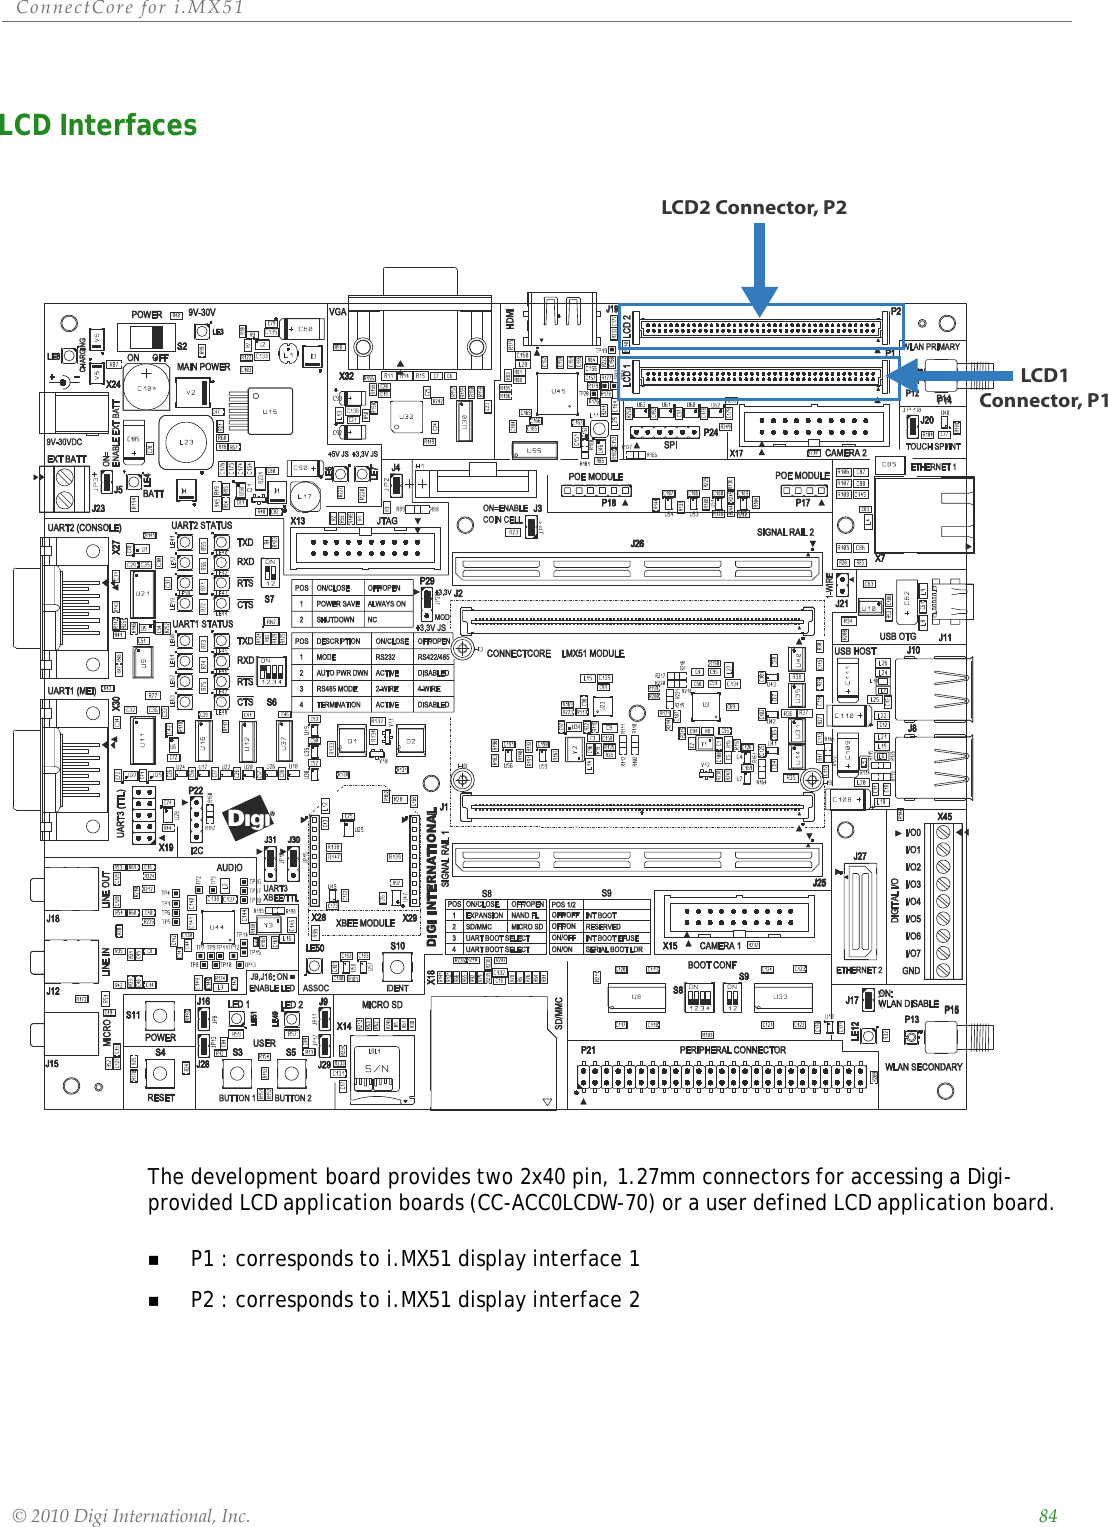 ConnectCorefori.MX51©2010DigiInternational,Inc. 84LCD Interfaces The development board provides two 2x40 pin, 1.27mm connectors for accessing a Digi-provided LCD application boards (CC-ACC0LCDW-70) or a user defined LCD application board. P1 : corresponds to i.MX51 display interface 1P2 : corresponds to i.MX51 display interface 2LCD2 Connector, P2LCD1Connector, P1